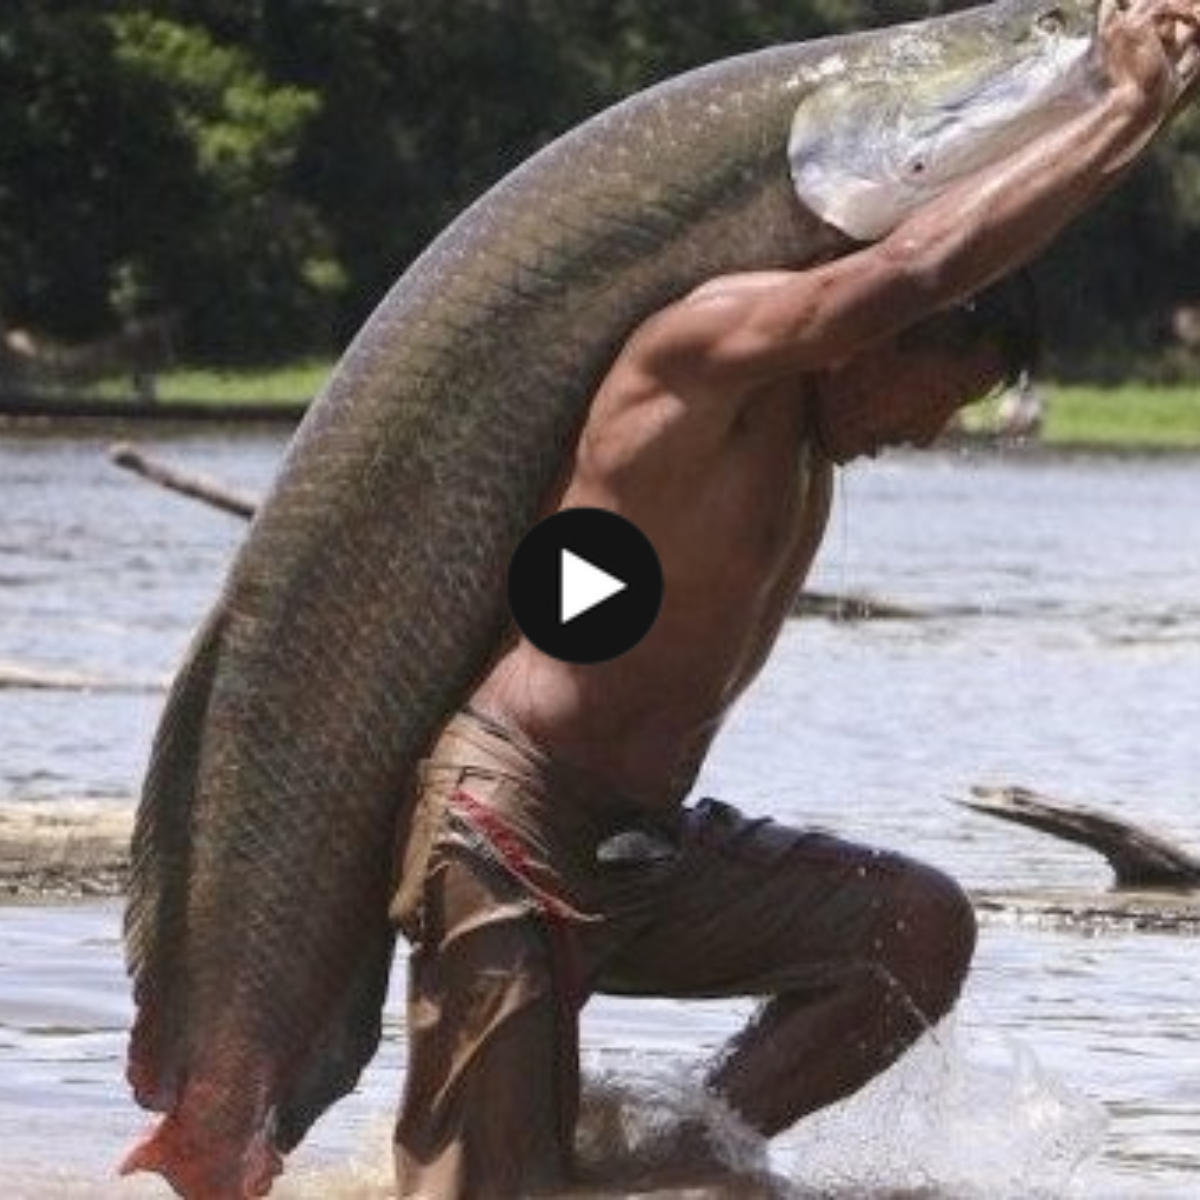 Among the biggest freshwater fish are Arapaima gigas.